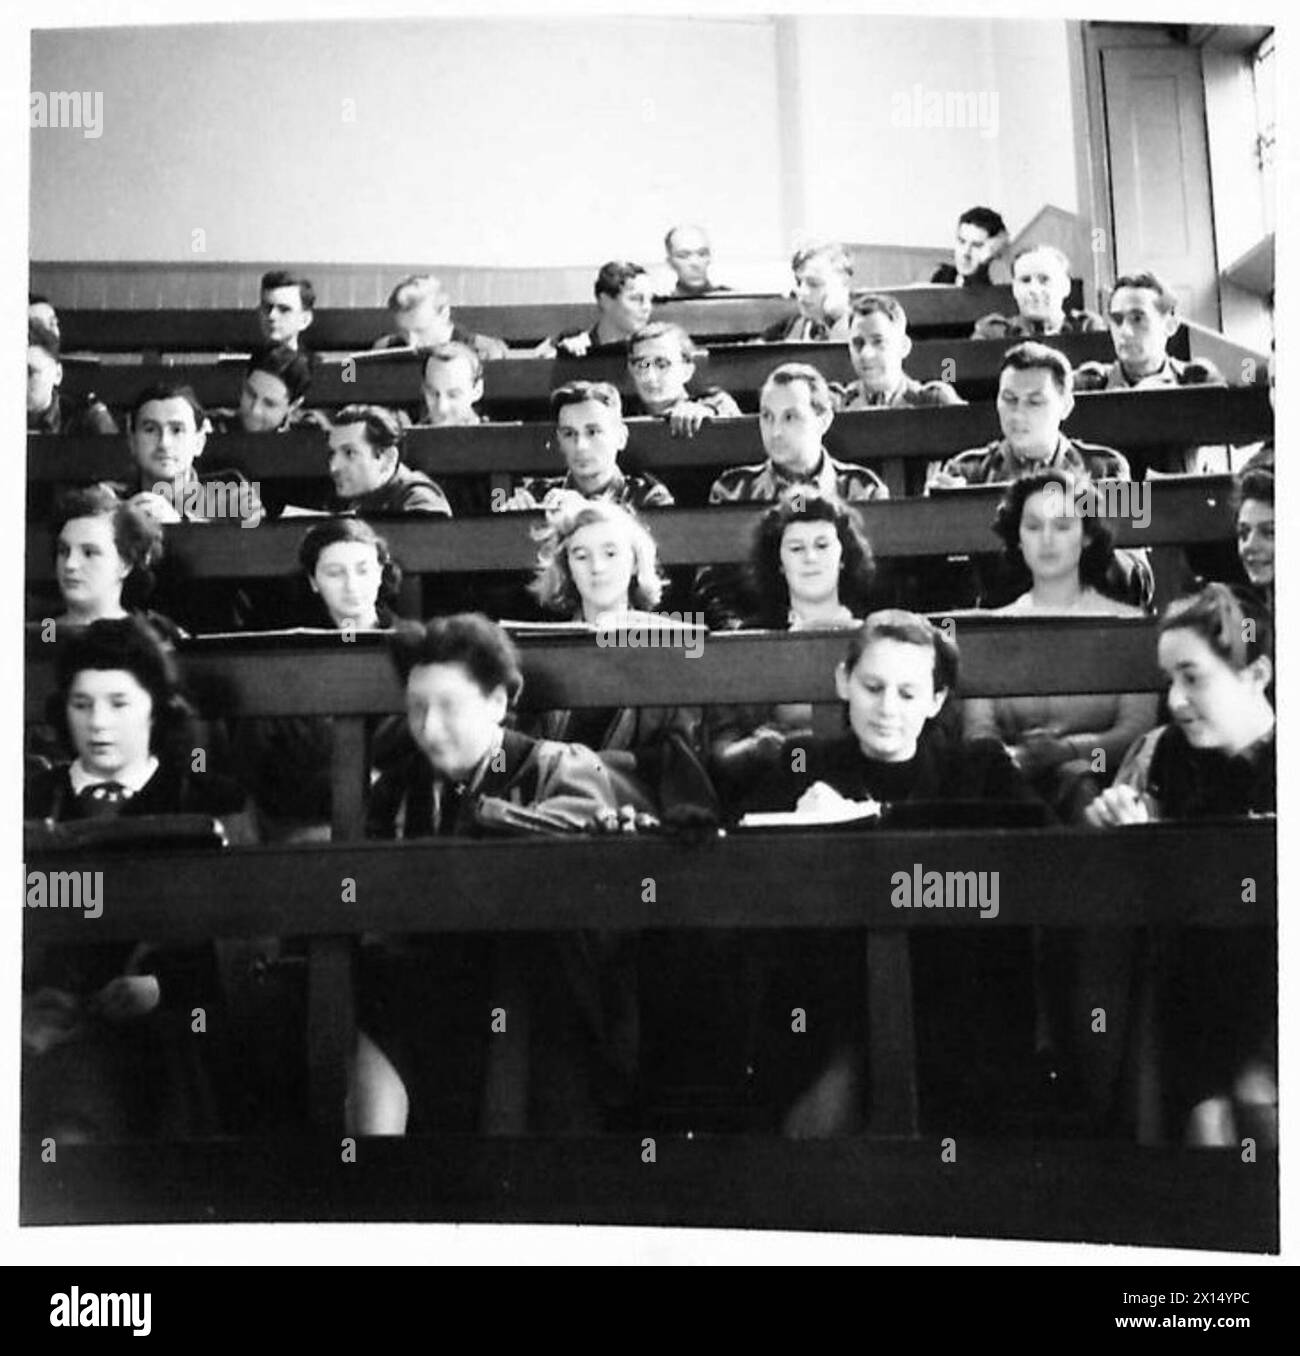 THE POLISH ARMY IN BRITAIN, 1940-1947 - Polish Army students taking a Economics lesson in a lecture room shared with female students. Professor Wright, the Dean of the Faculty at the University of St Andrews, offered General Marian Kukiel, the CO of the 1st Polish Corps, facilities for Polish Army students to continue their studies at the University. The offer was accepted and out of 350 candidates, 100 were selected for further education in English, political science, economics, French literature, arts, chemistry and research. Some of the students already hold degrees in Polish universities. Stock Photo